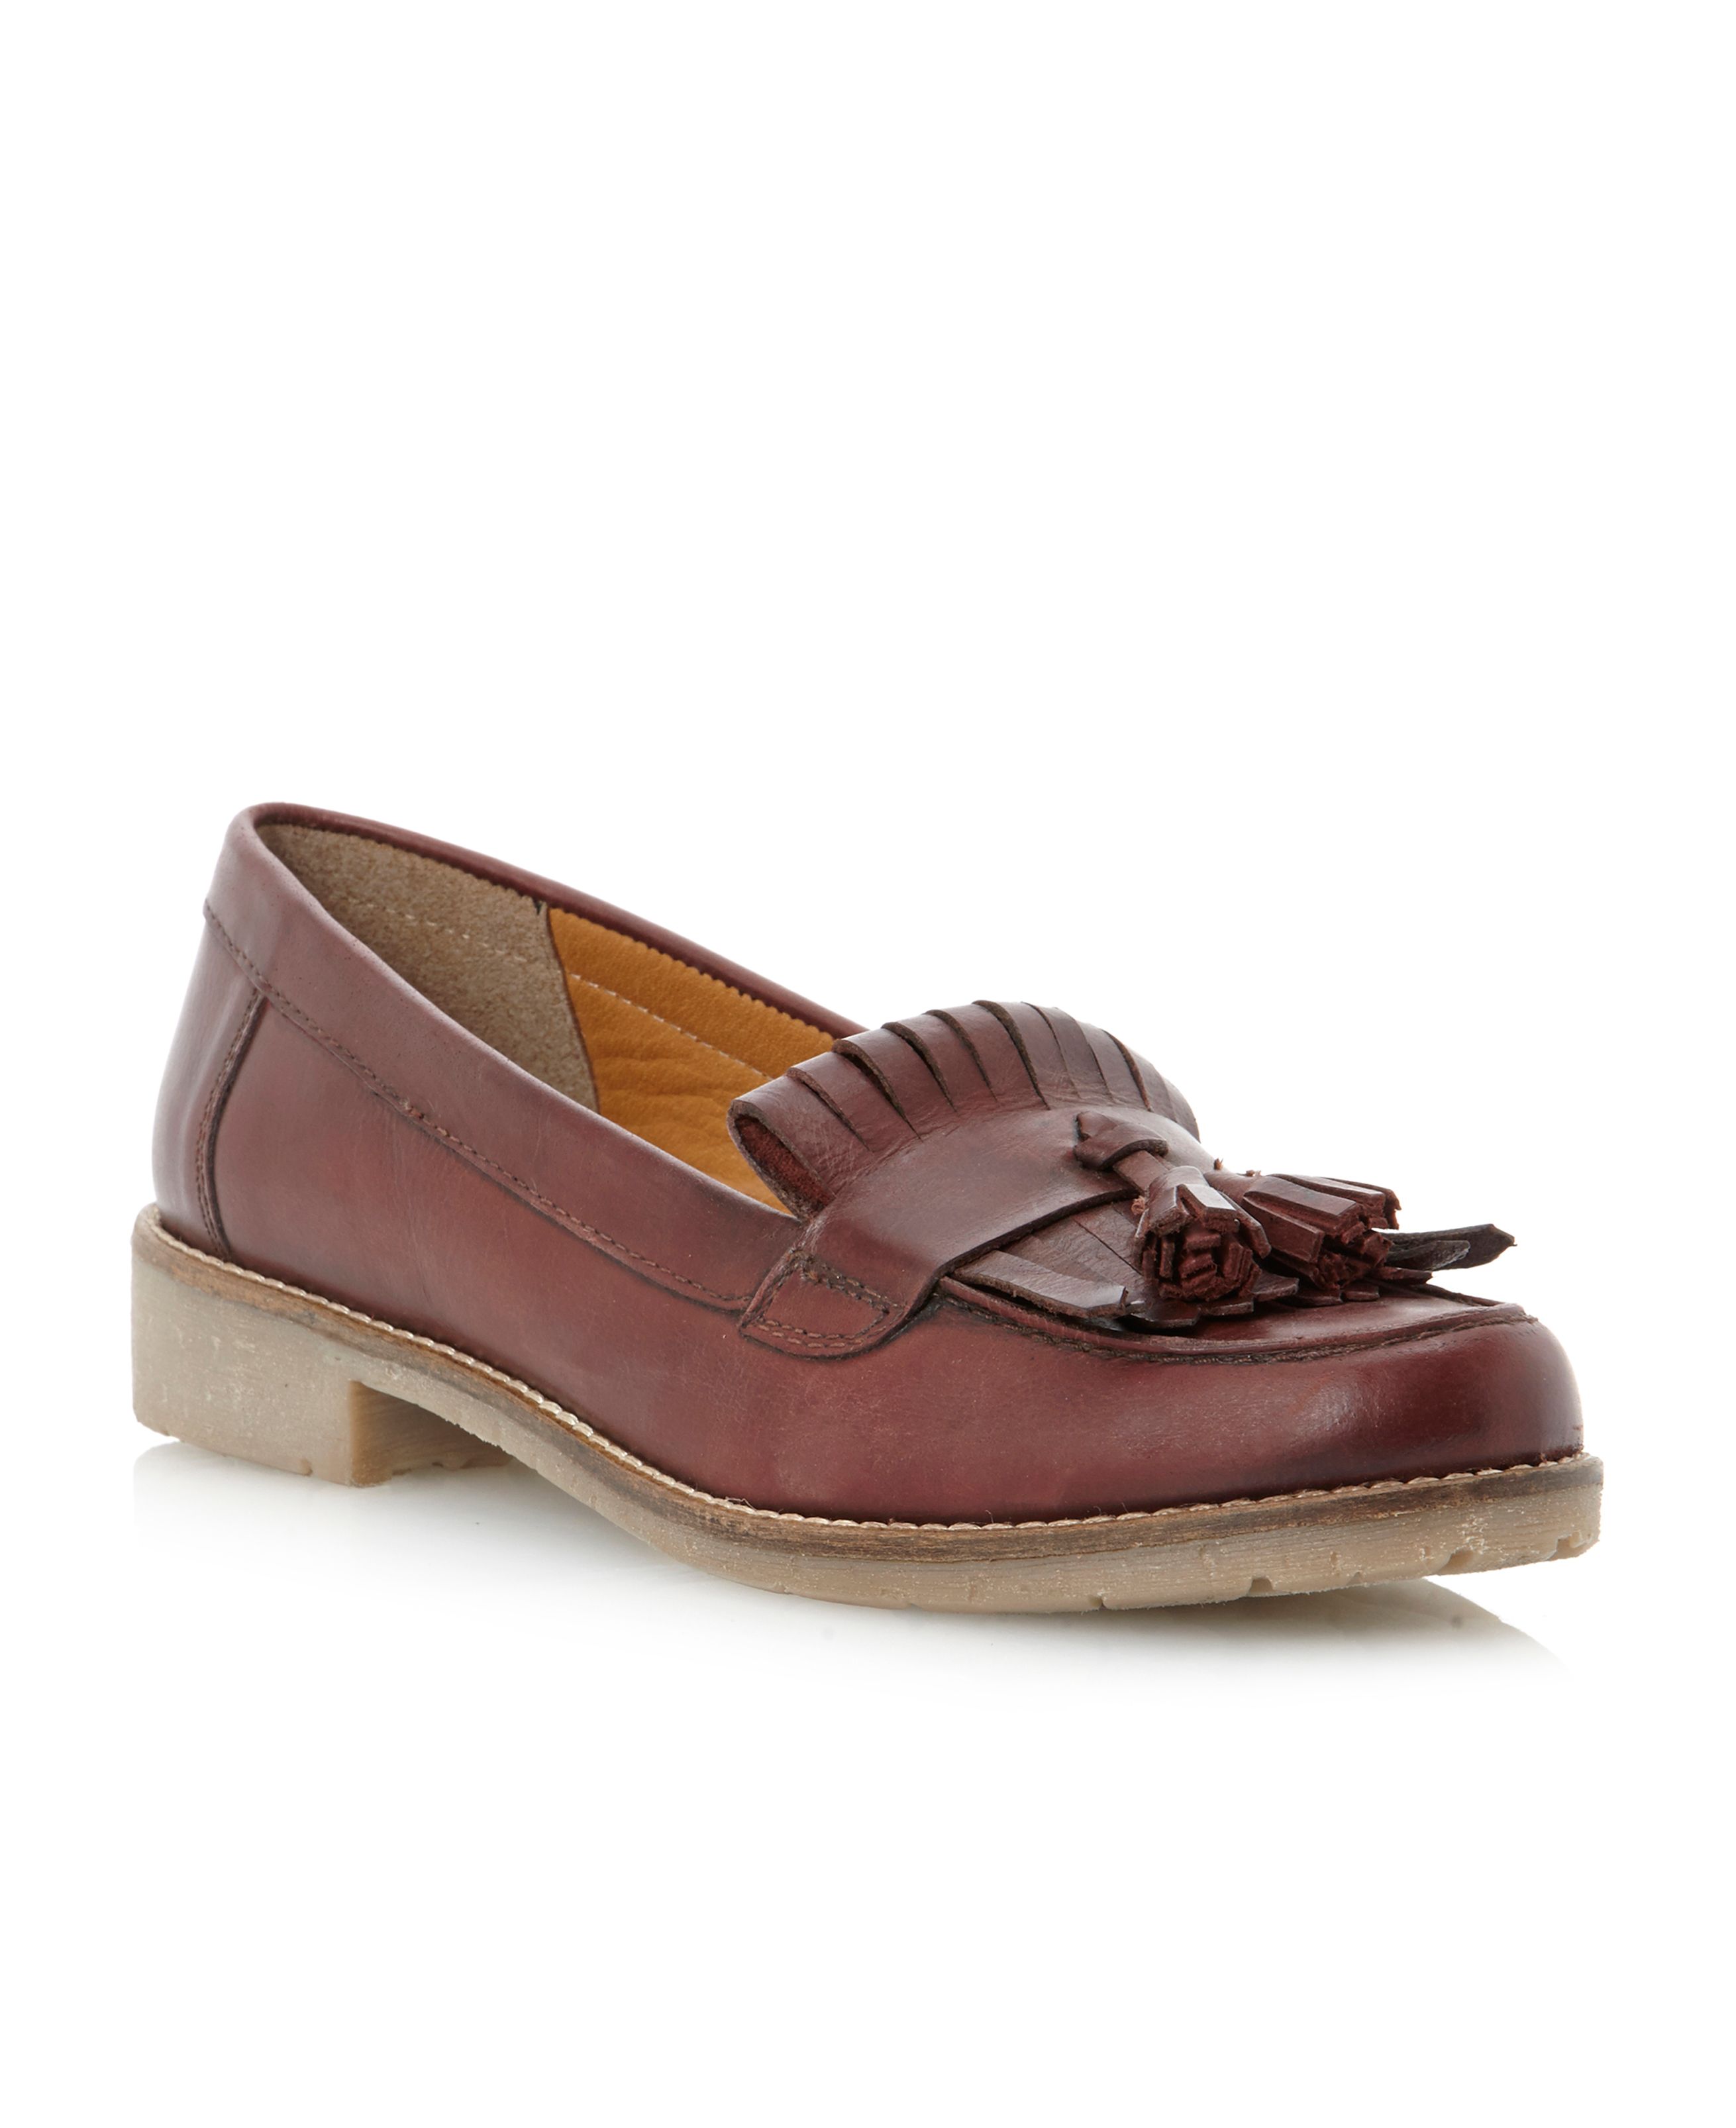 Dune Libertiecrepe Sole Tassel Loafer Shoes in Brown | Lyst